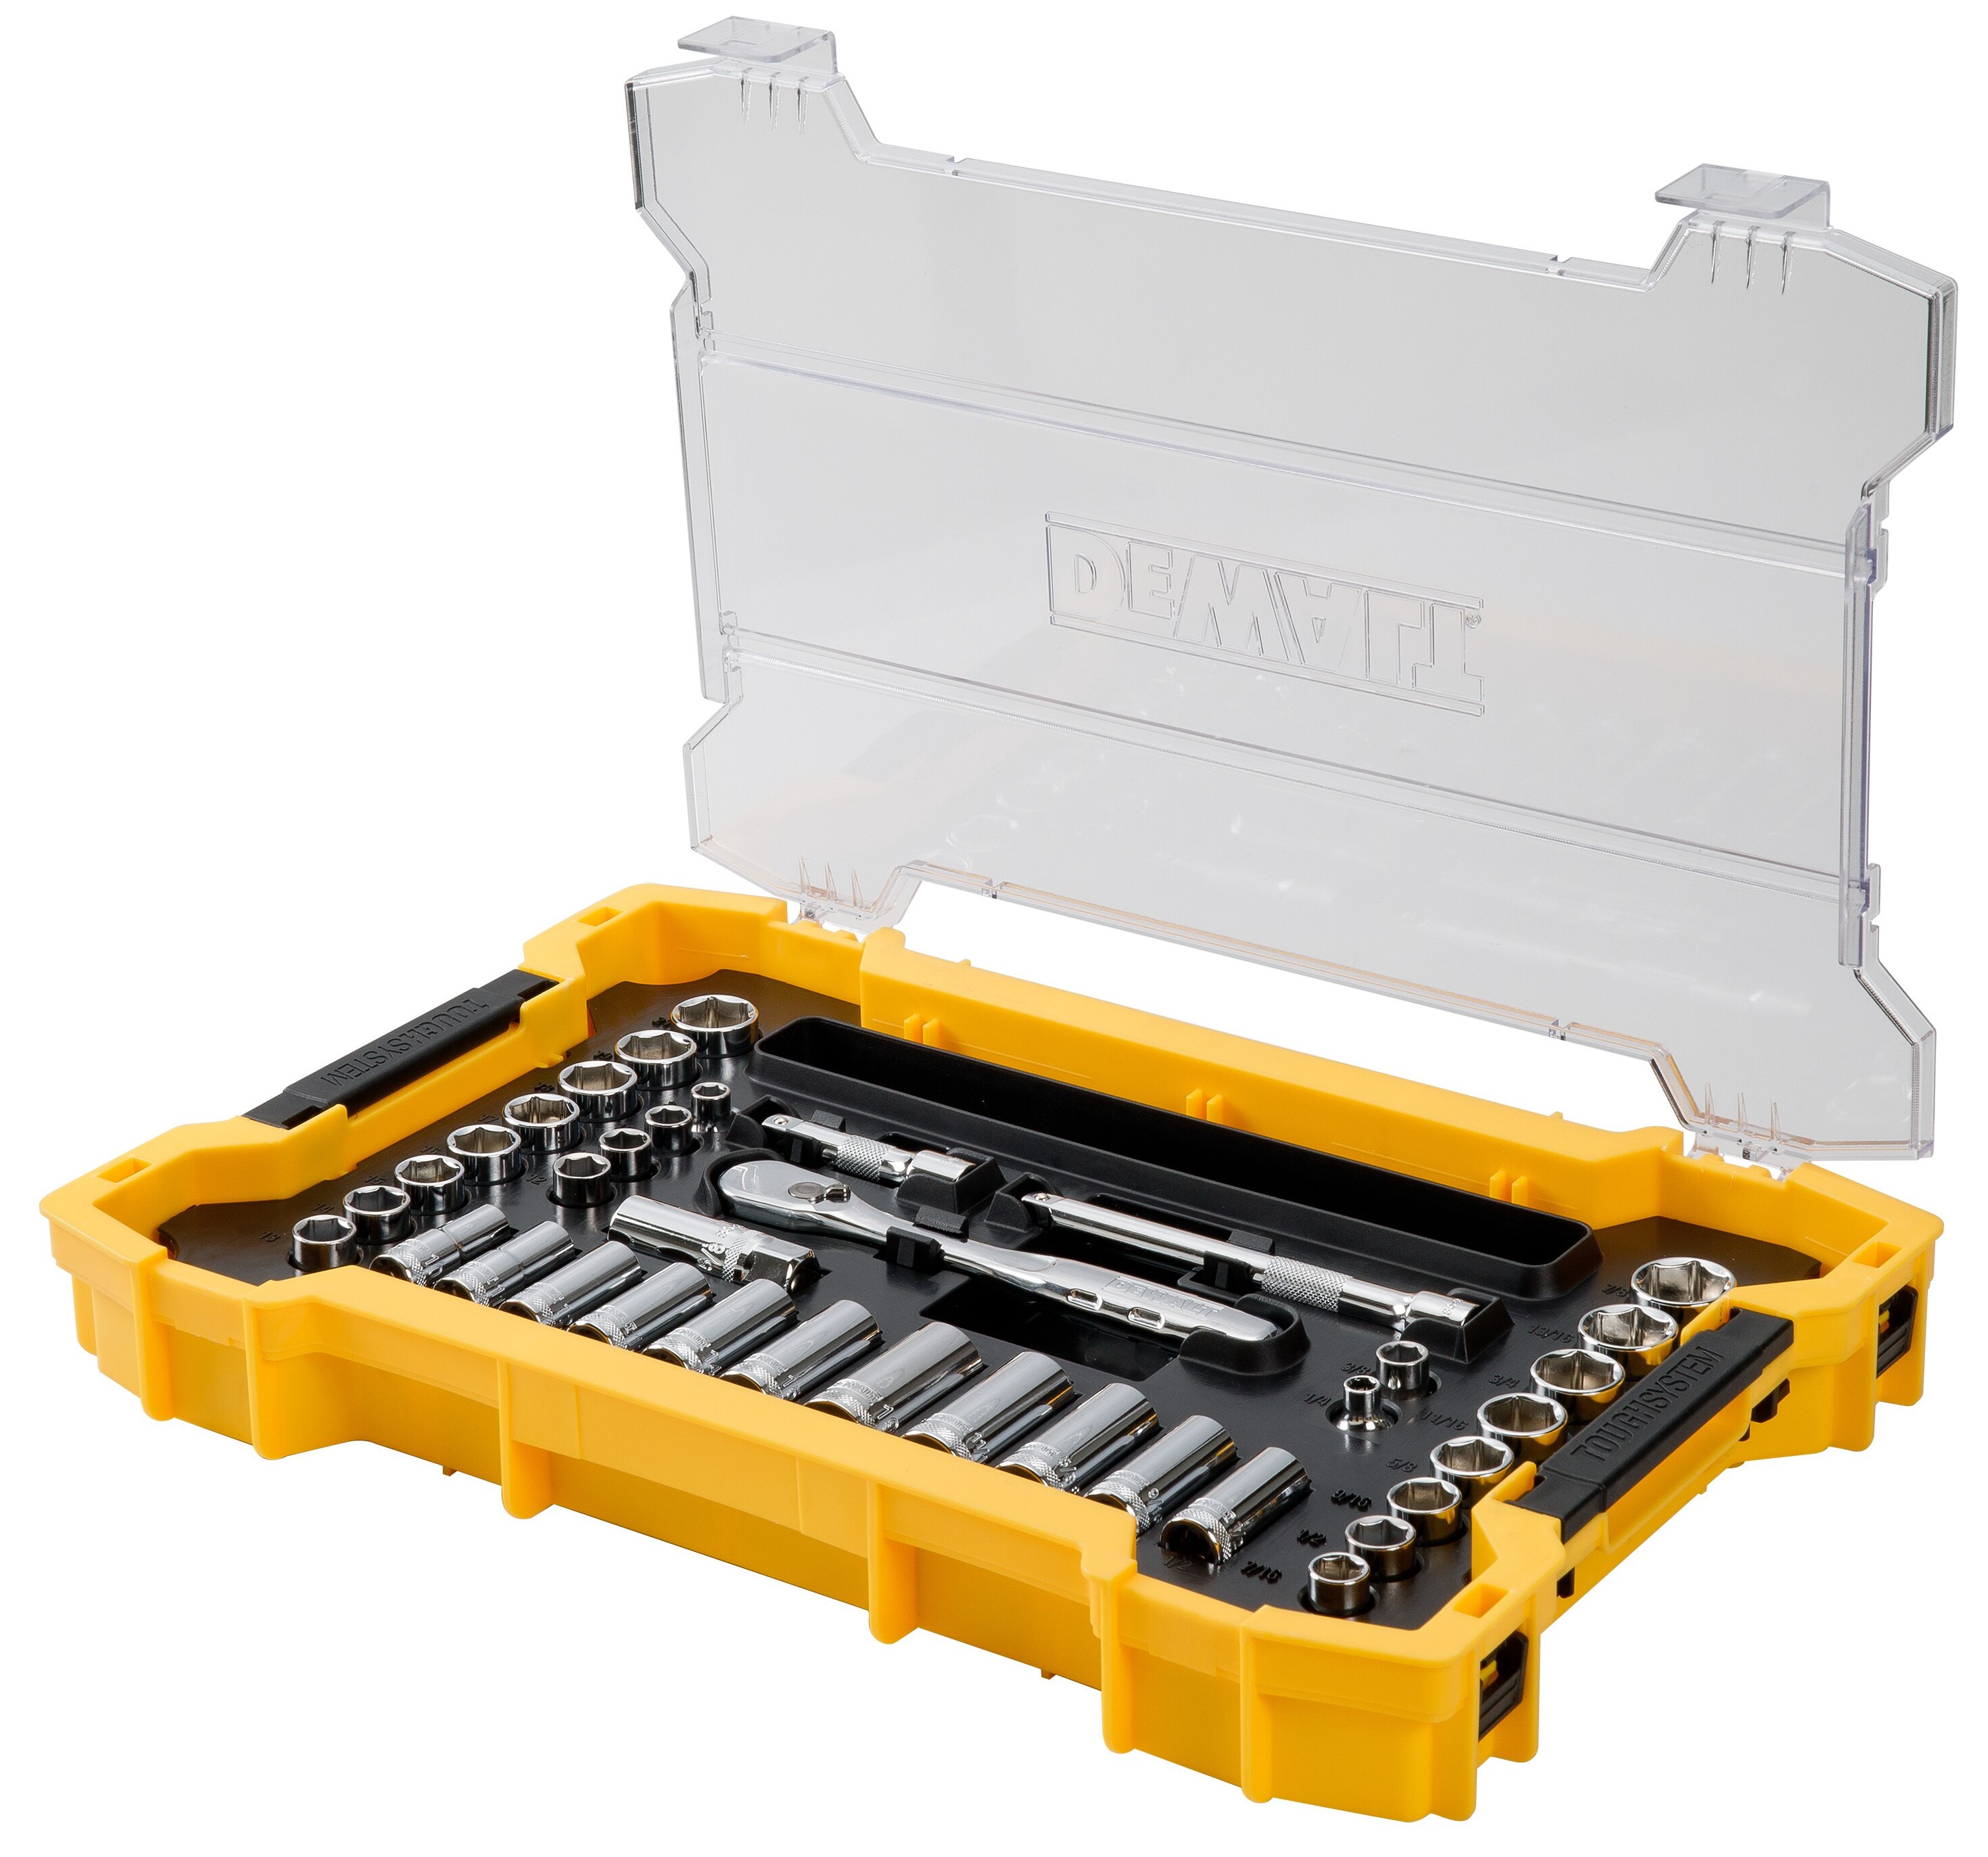 Home Depot: Dewalt 37 PC. 3/8 in. Drive Socket Set With Toughsystem 2.0 Tray for $60 and free shipping